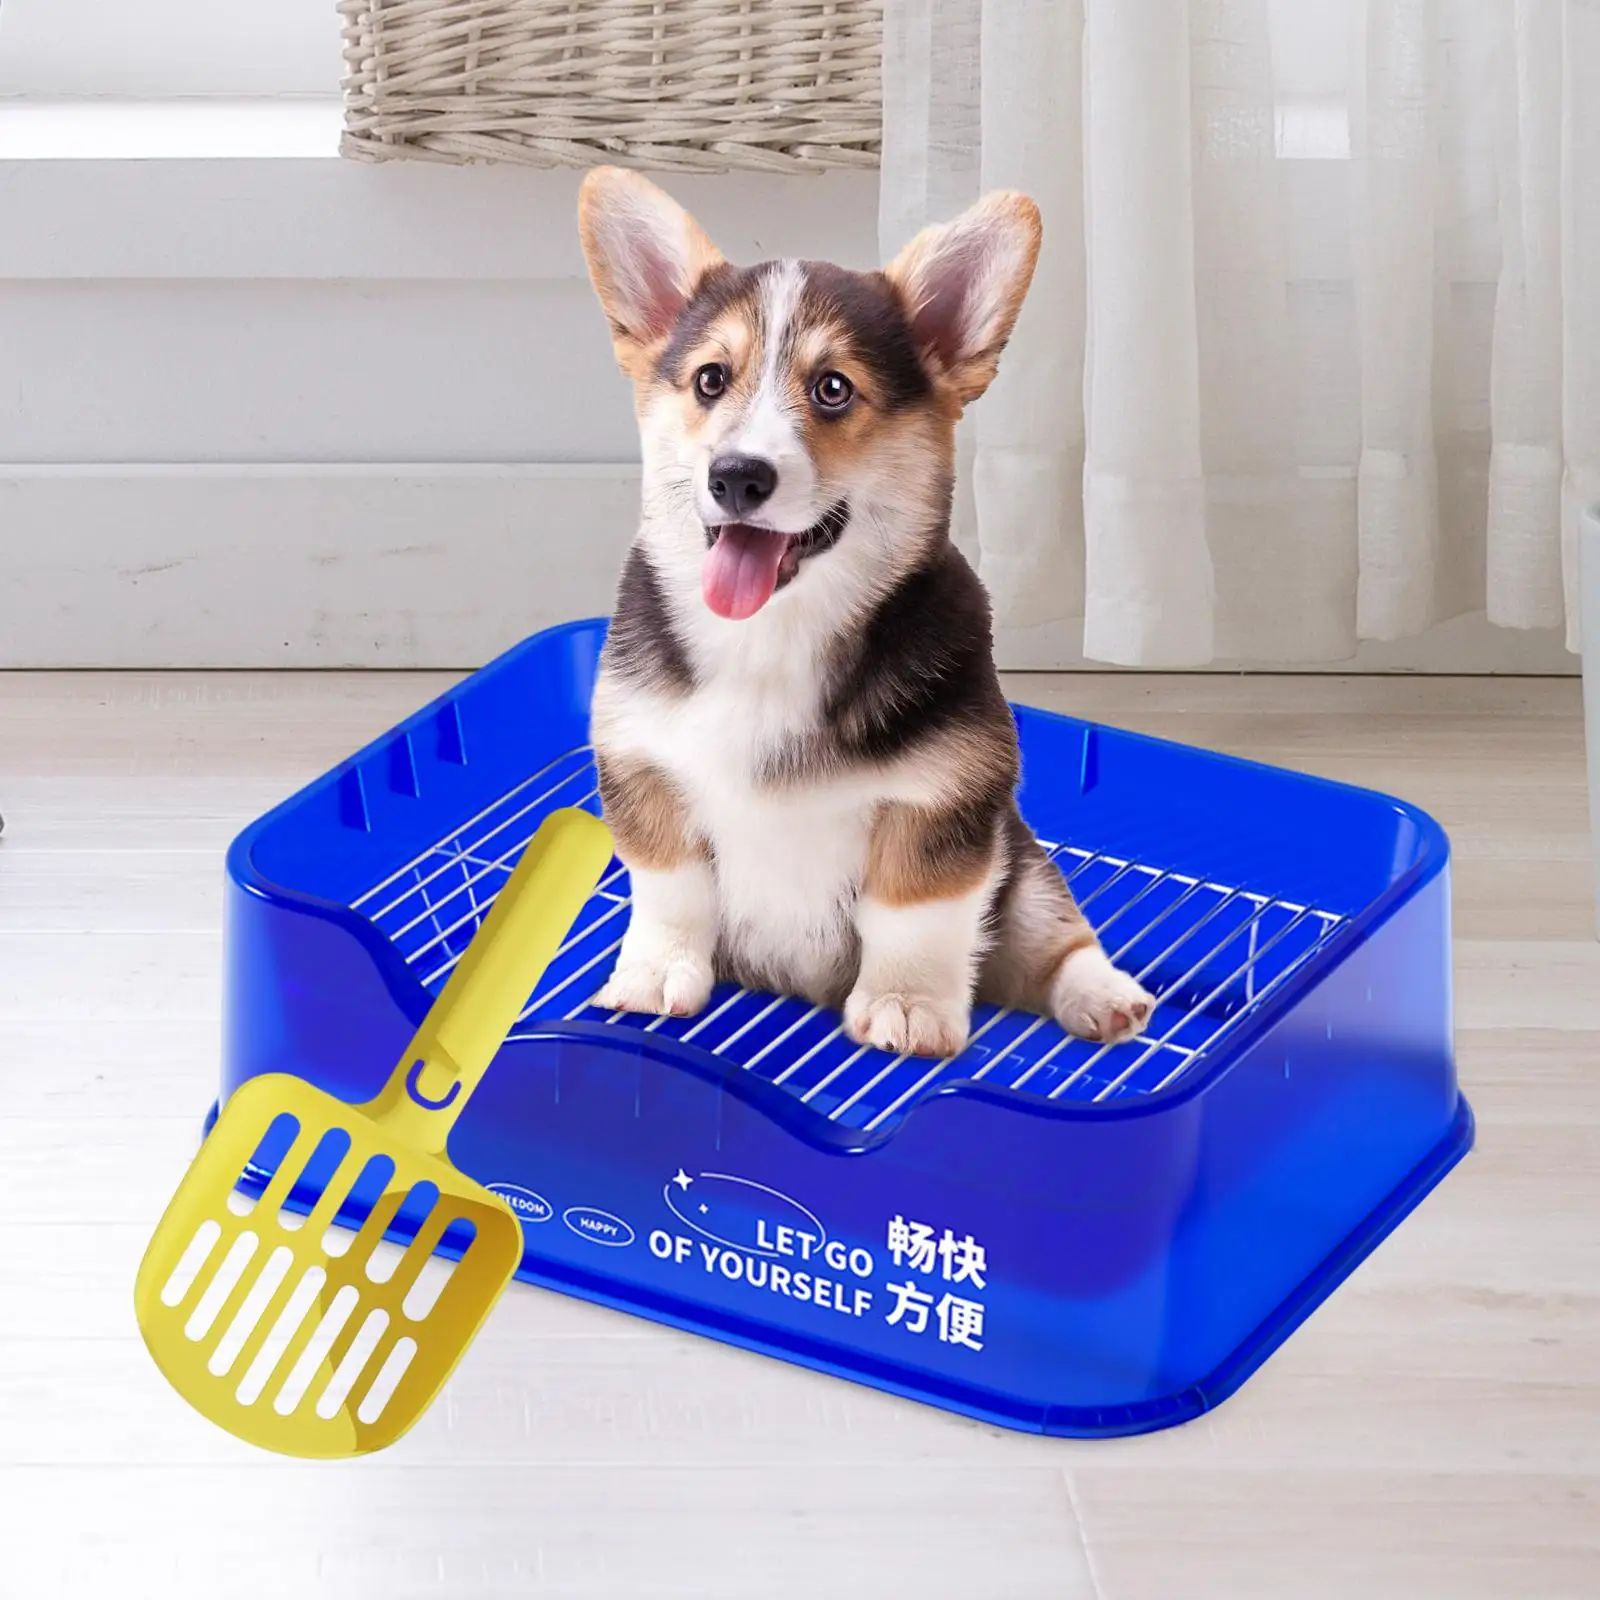 Dog Toilet Tray Litter Box for Indoor Cats Portable Indoor Potty Tray Cleaning Sand Box Outdoor Puppy Potty Pan Trainer Corner